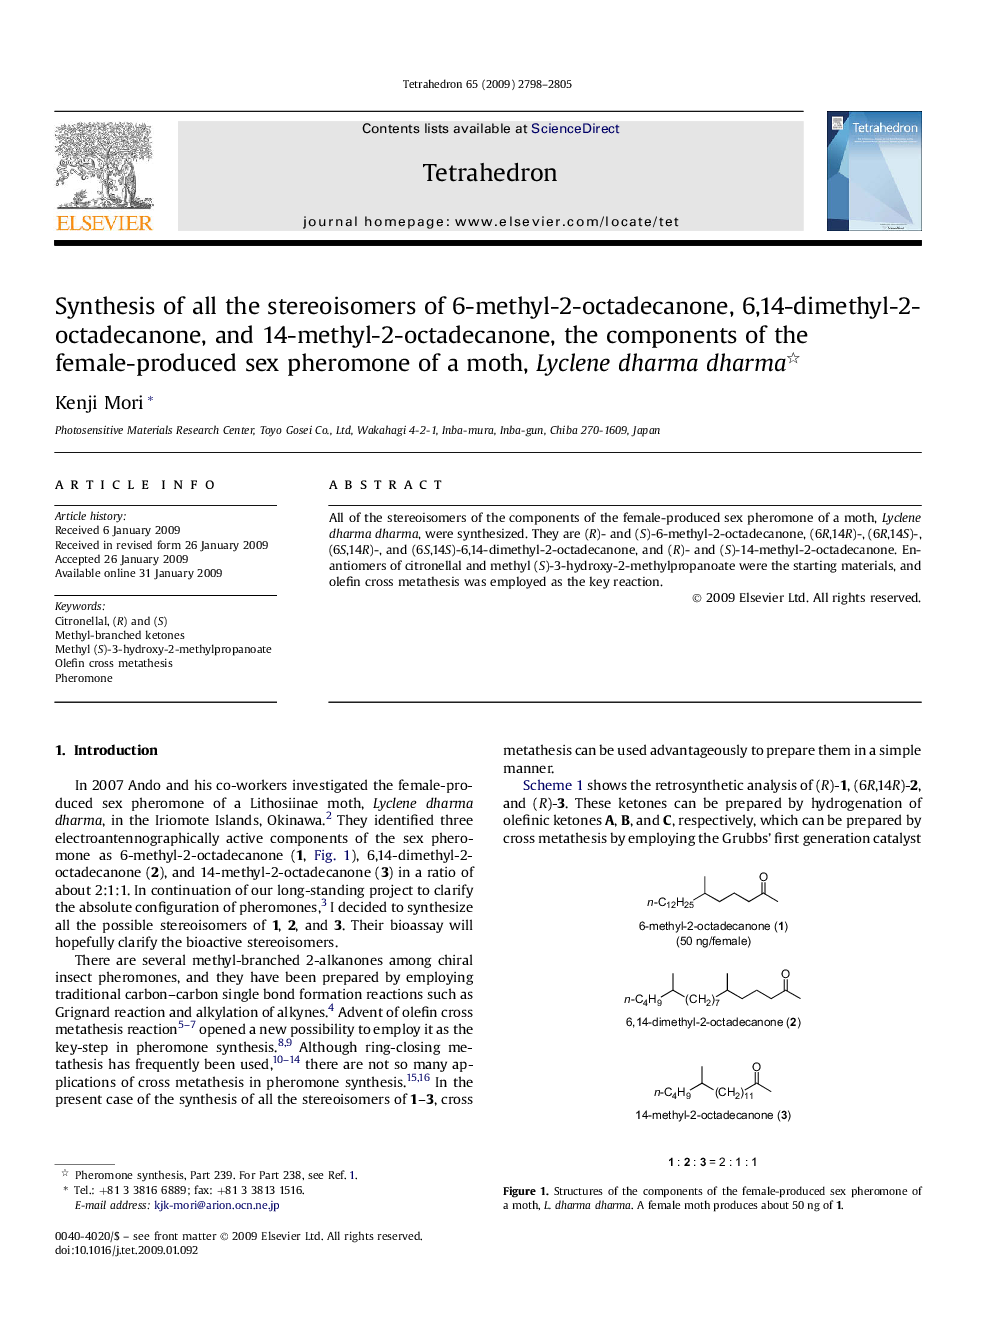 Synthesis of all the stereoisomers of 6-methyl-2-octadecanone, 6,14-dimethyl-2-octadecanone, and 14-methyl-2-octadecanone, the components of the female-produced sex pheromone of a moth, Lyclene dharma dharma